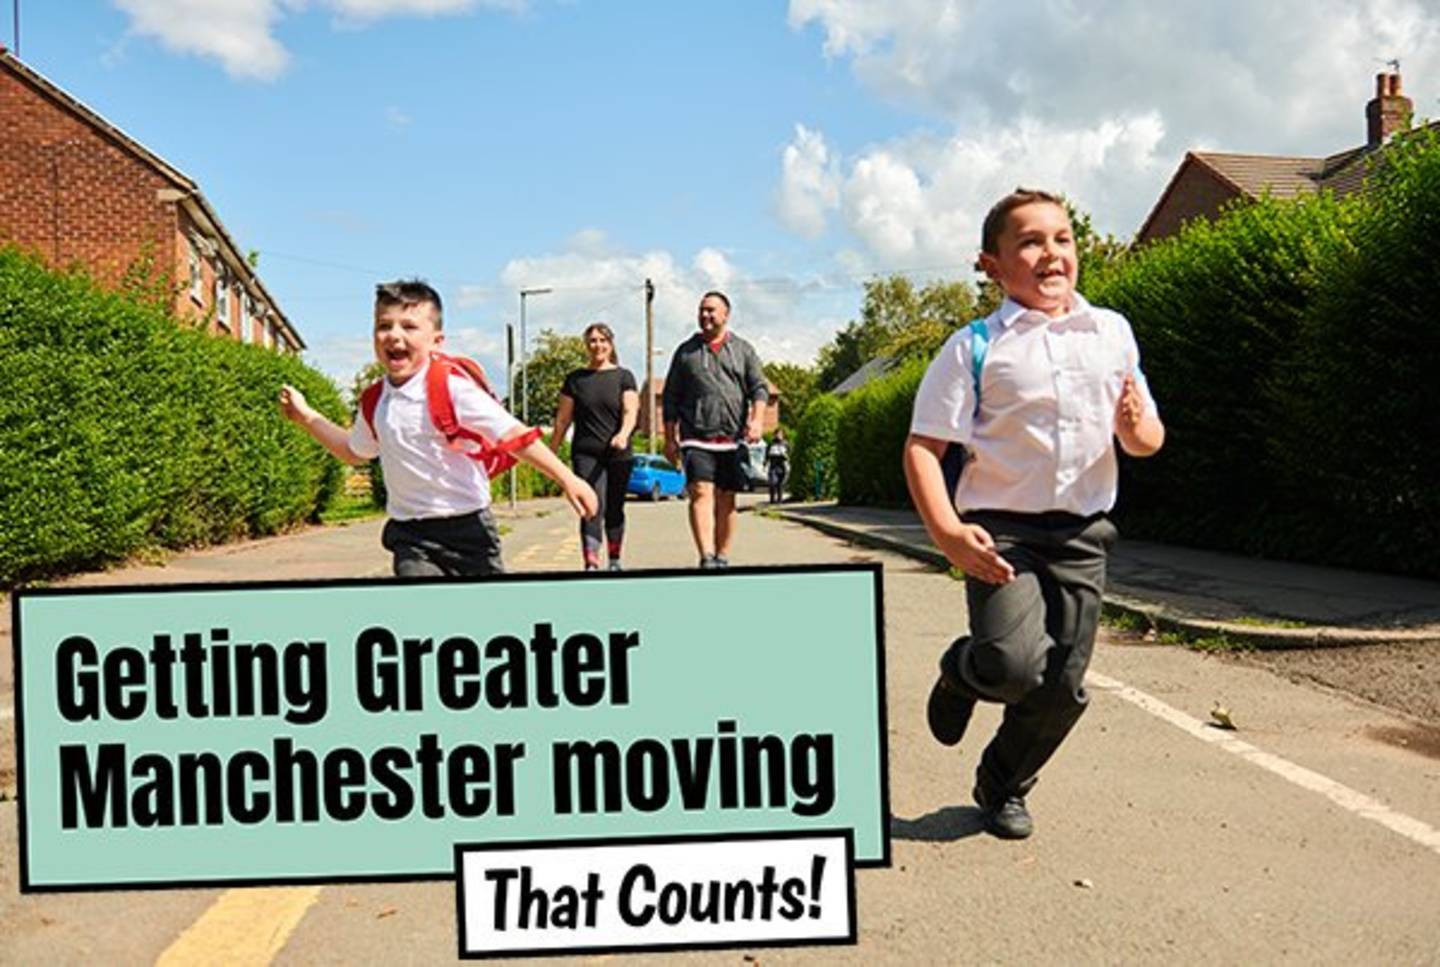 Young people running in the That Counts! poster